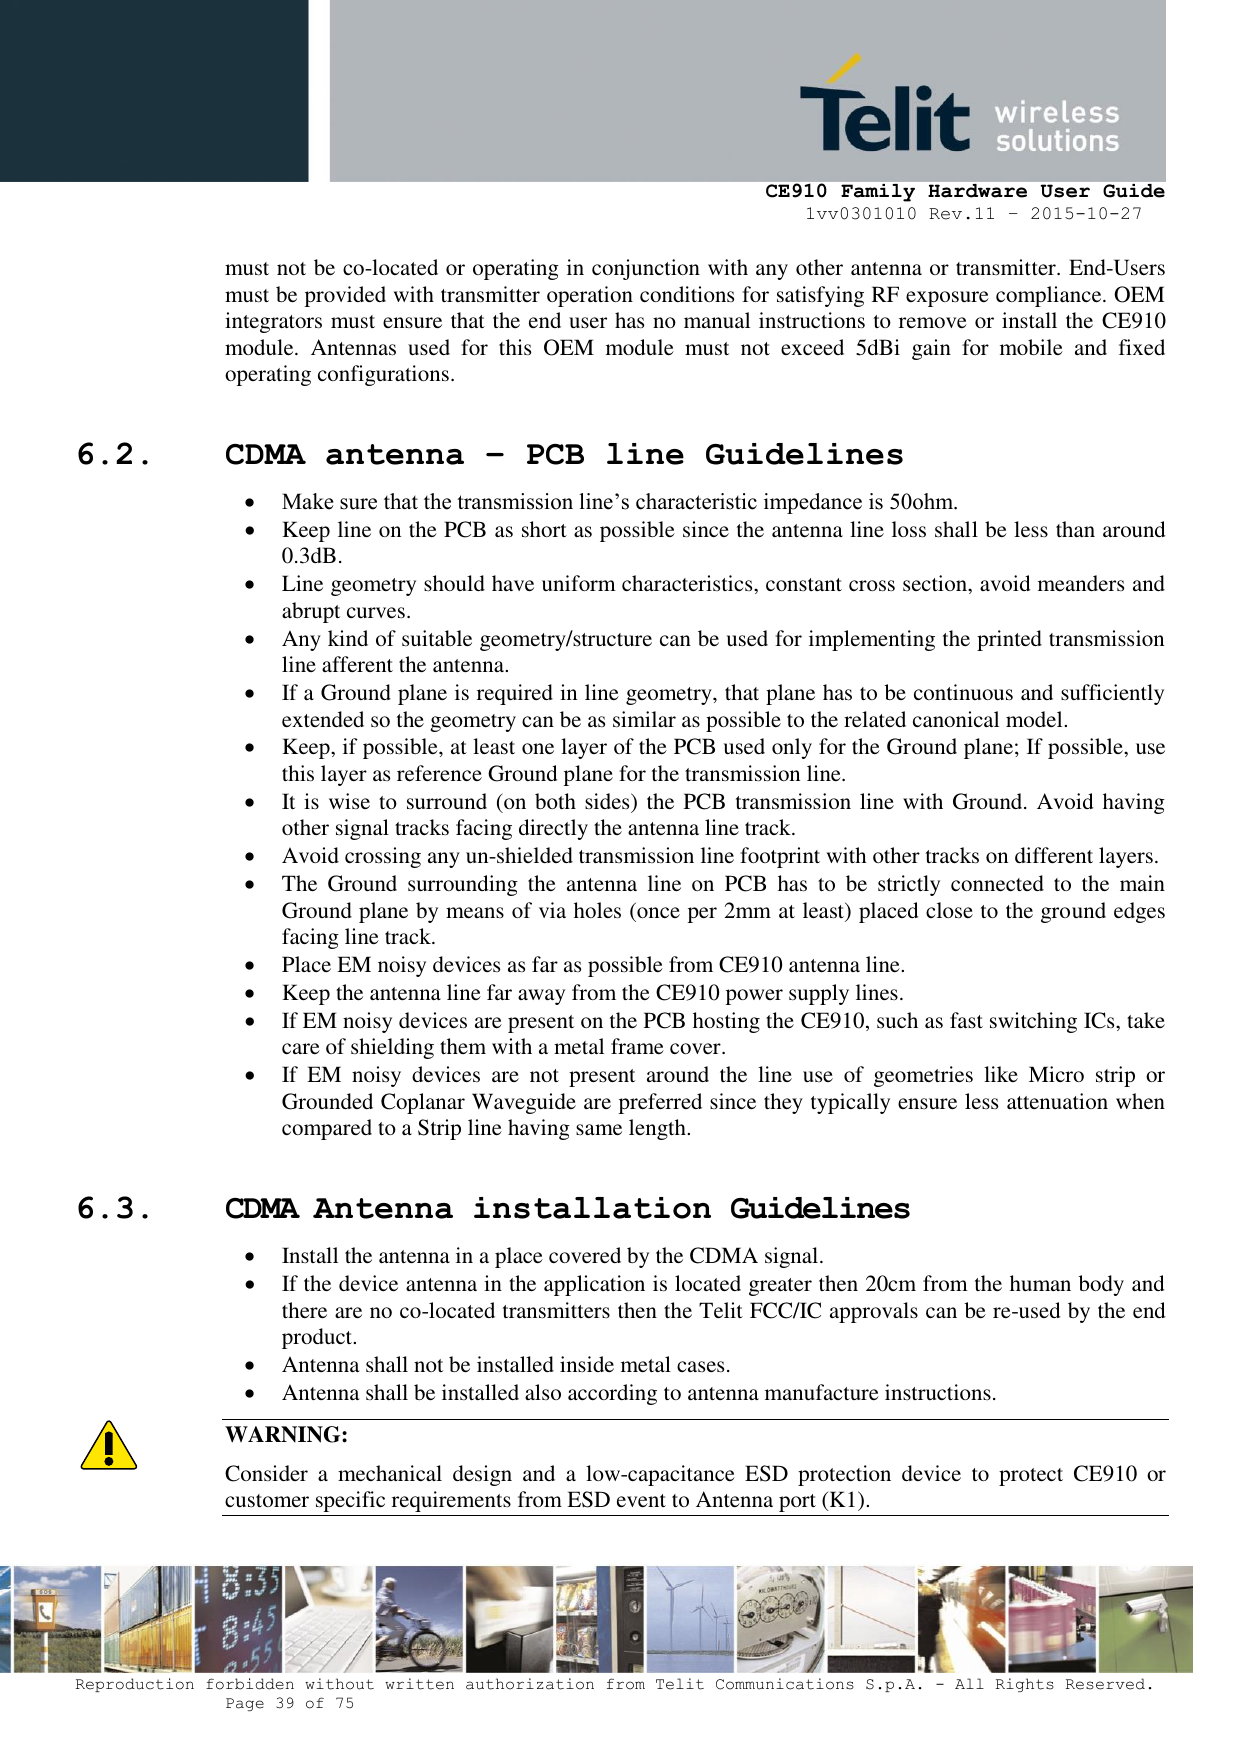     CE910 Family Hardware User Guide 1vv0301010 Rev.11 – 2015-10-27 Reproduction forbidden without written authorization from Telit Communications S.p.A. - All Rights Reserved.    Page 39 of 75                                                     must not be co-located or operating in conjunction with any other antenna or transmitter. End-Users must be provided with transmitter operation conditions for satisfying RF exposure compliance. OEM integrators must ensure that the end user has no manual instructions to remove or install the CE910 module.  Antennas  used  for  this  OEM  module  must  not  exceed  5dBi  gain  for  mobile  and  fixed operating configurations. 6.2. CDMA antenna – PCB line Guidelines   Make sure that the transmission line’s characteristic impedance is 50ohm.  Keep line on the PCB as short as possible since the antenna line loss shall be less than around 0.3dB.  Line geometry should have uniform characteristics, constant cross section, avoid meanders and abrupt curves.  Any kind of suitable geometry/structure can be used for implementing the printed transmission line afferent the antenna.  If a Ground plane is required in line geometry, that plane has to be continuous and sufficiently extended so the geometry can be as similar as possible to the related canonical model.  Keep, if possible, at least one layer of the PCB used only for the Ground plane; If possible, use this layer as reference Ground plane for the transmission line.  It is wise to surround (on both sides) the PCB transmission line with Ground. Avoid having other signal tracks facing directly the antenna line track.  Avoid crossing any un-shielded transmission line footprint with other tracks on different layers.  The  Ground  surrounding  the  antenna  line  on  PCB  has  to  be  strictly  connected  to  the  main Ground plane by means of via holes (once per 2mm at least) placed close to the ground edges facing line track.  Place EM noisy devices as far as possible from CE910 antenna line.  Keep the antenna line far away from the CE910 power supply lines.  If EM noisy devices are present on the PCB hosting the CE910, such as fast switching ICs, take care of shielding them with a metal frame cover.  If  EM  noisy  devices  are  not  present  around  the  line  use  of  geometries  like  Micro  strip  or Grounded Coplanar Waveguide are preferred since they typically ensure less attenuation when compared to a Strip line having same length. 6.3. CDMA Antenna installation Guidelines  Install the antenna in a place covered by the CDMA signal.   If the device antenna in the application is located greater then 20cm from the human body and there are no co-located transmitters then the Telit FCC/IC approvals can be re-used by the end product.  Antenna shall not be installed inside metal cases.  Antenna shall be installed also according to antenna manufacture instructions. WARNING: Consider  a  mechanical  design  and  a  low-capacitance  ESD  protection  device  to  protect  CE910  or customer specific requirements from ESD event to Antenna port (K1). 